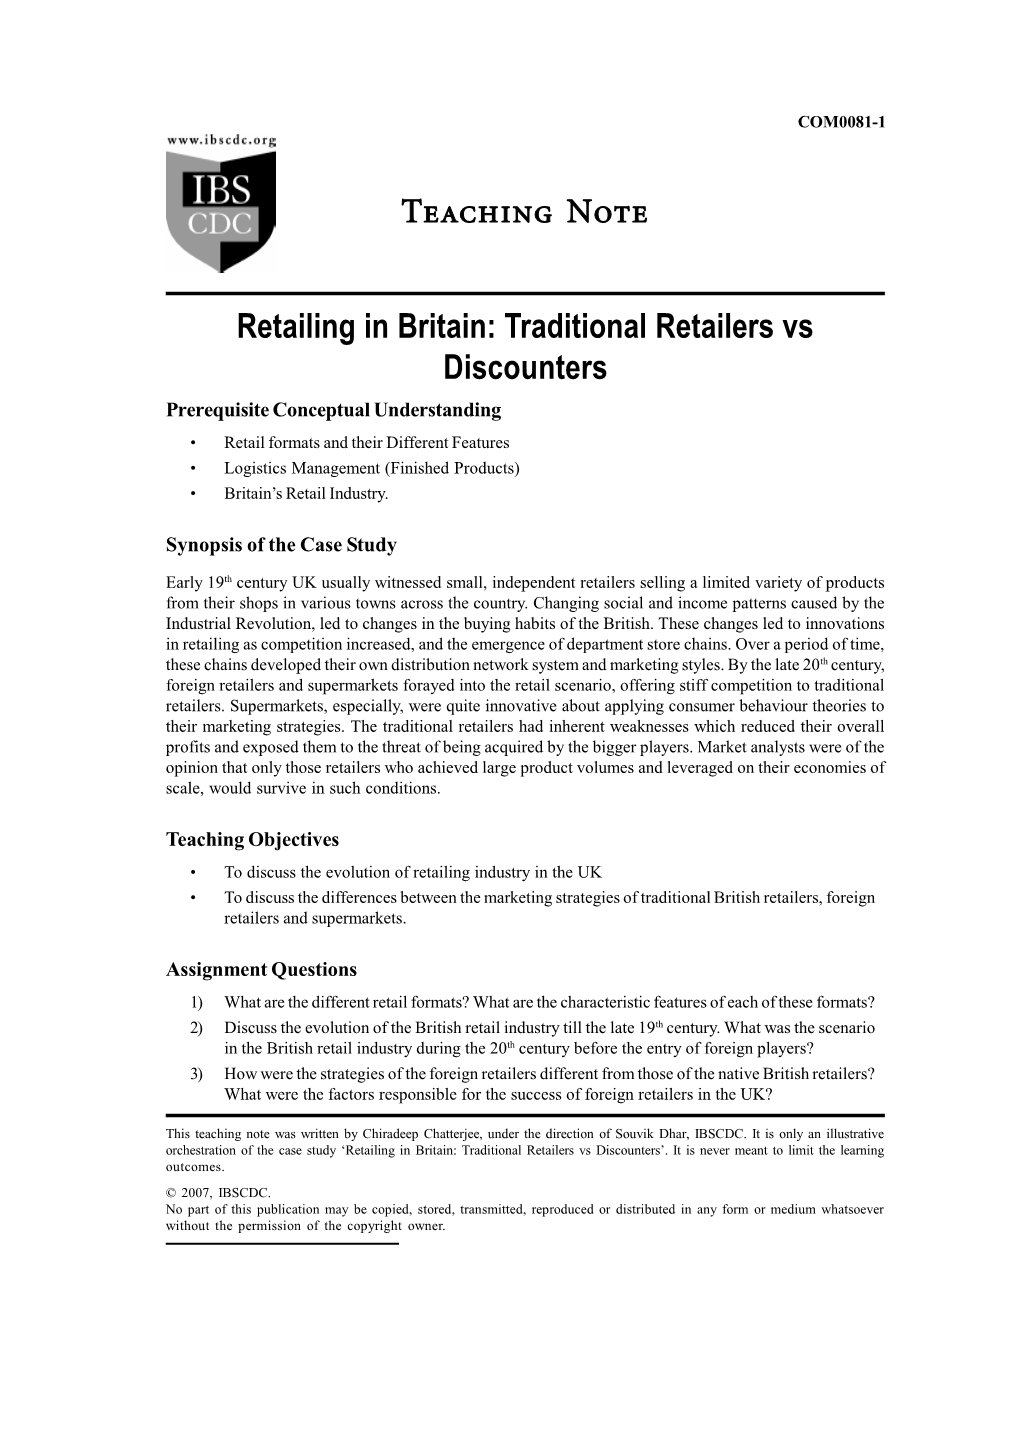 Traditional Retailers Vs Discounters